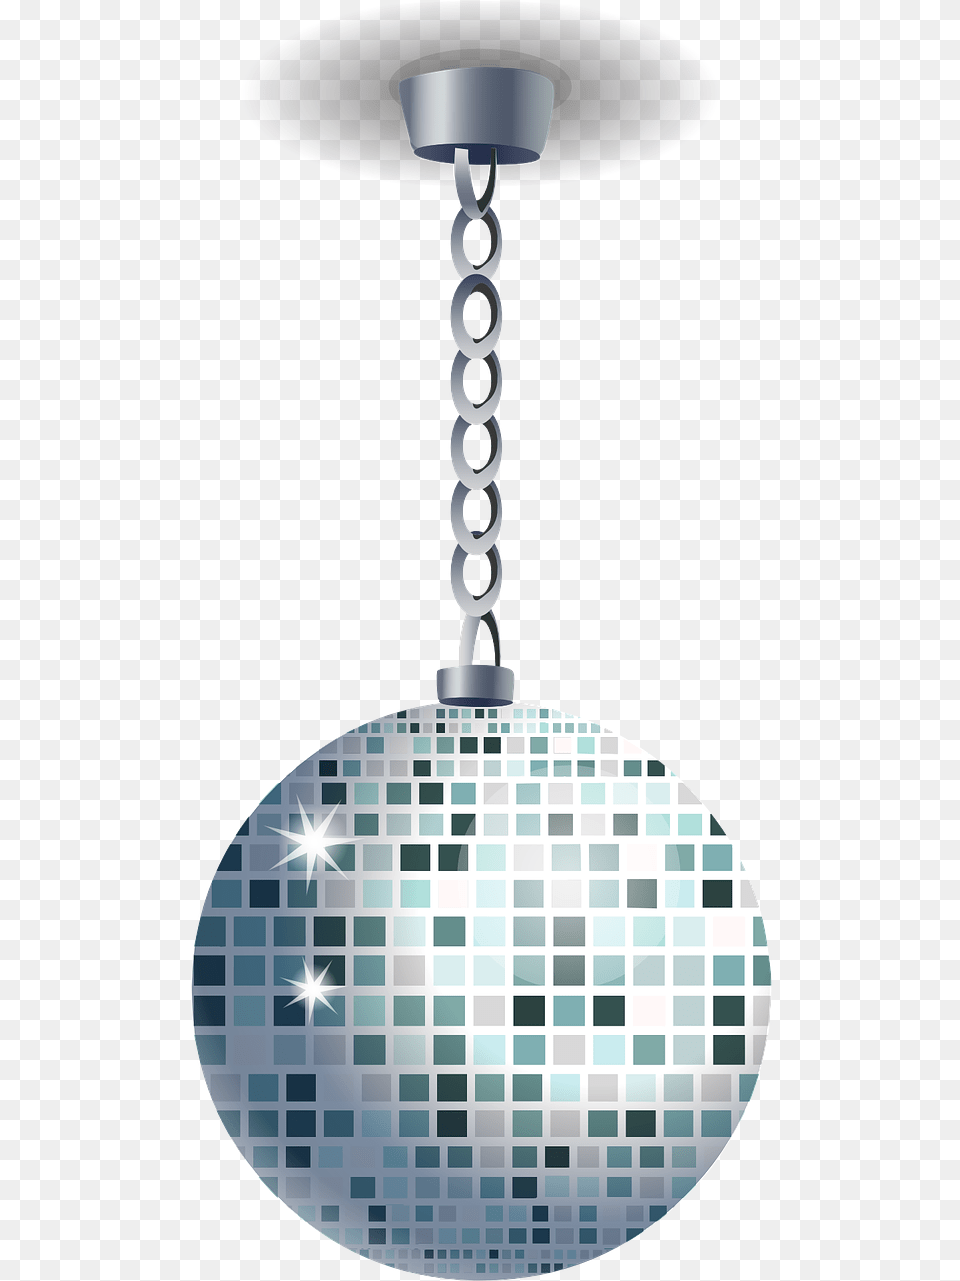 Disco Ball Animated Transparent, Lighting, Chandelier, Lamp, Ceiling Light Png Image